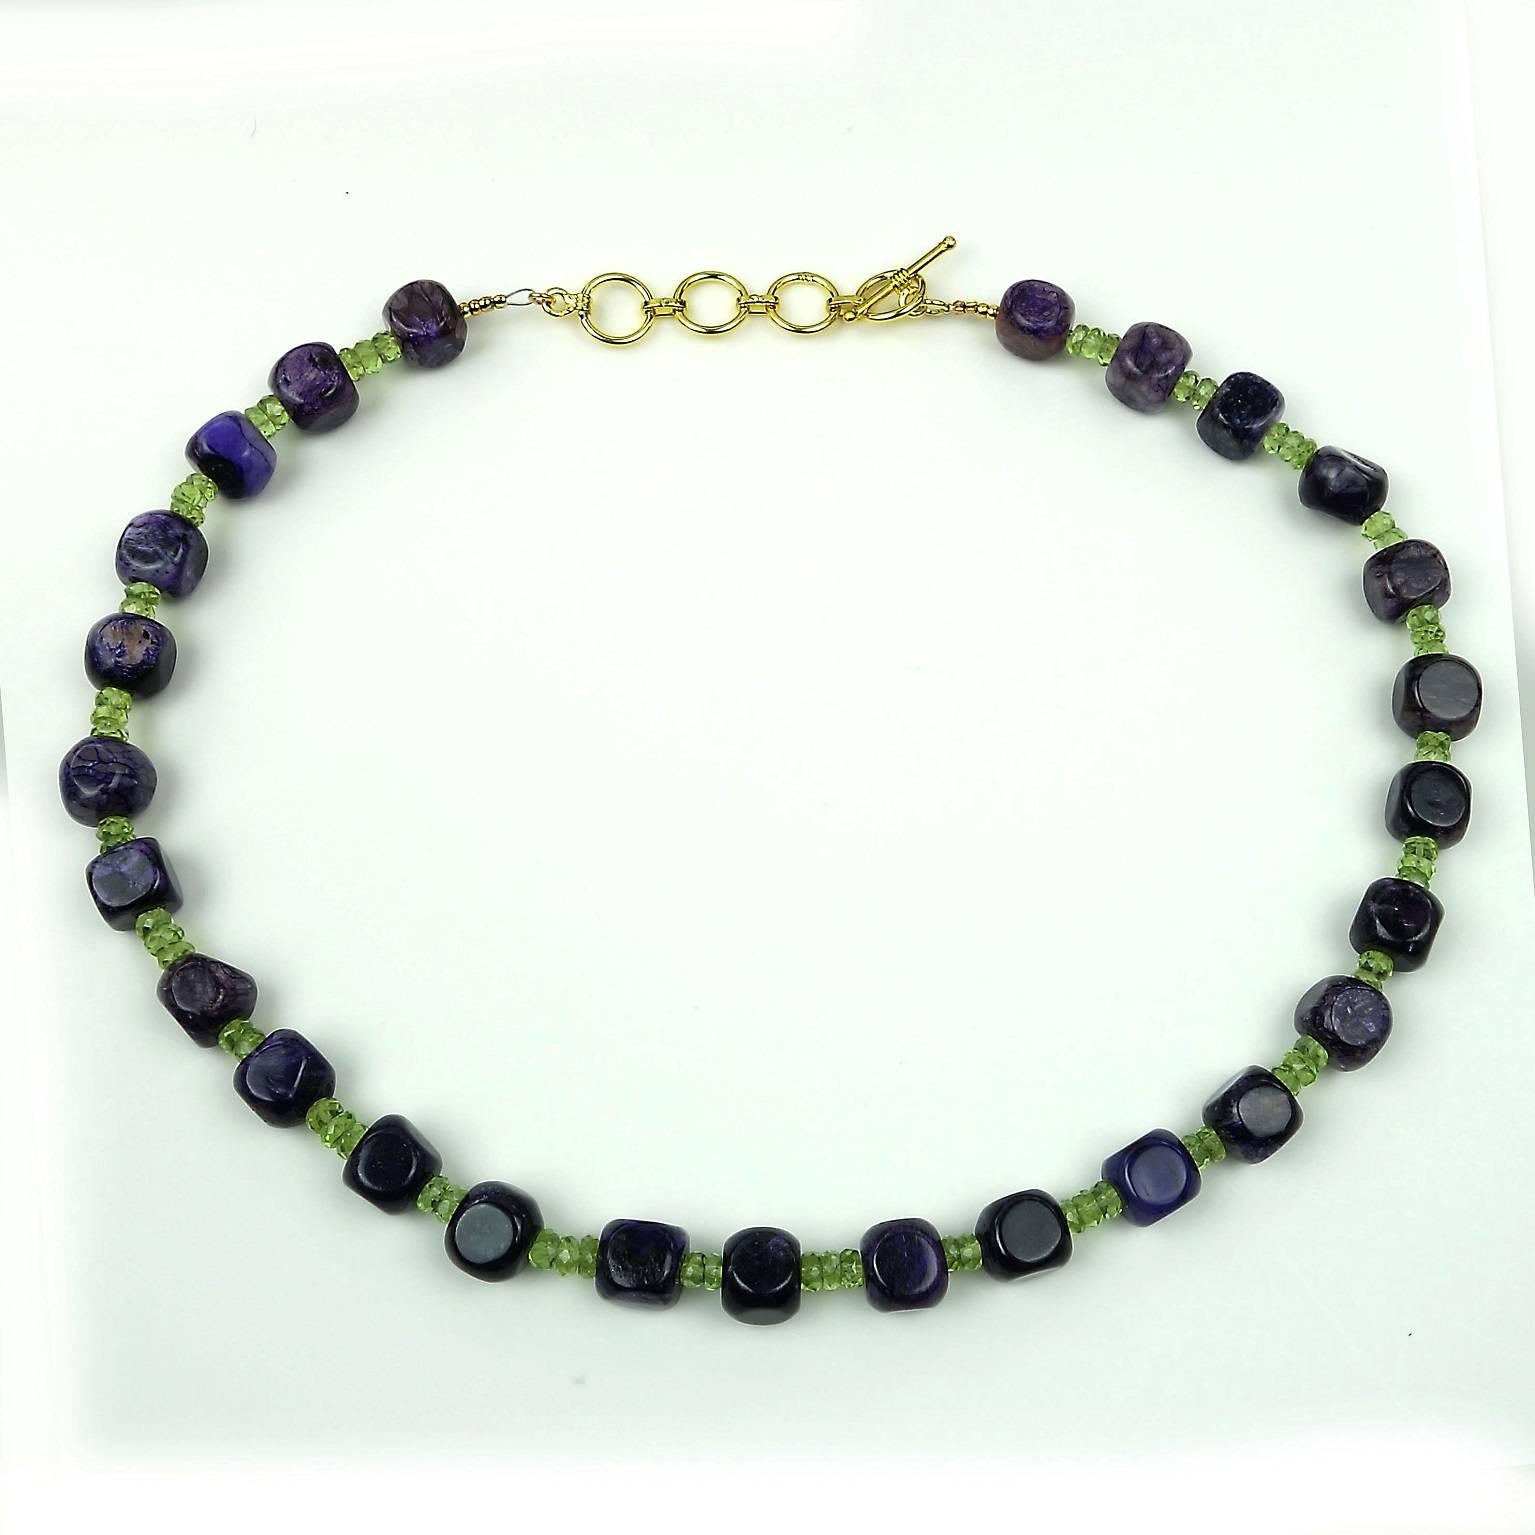 Women's or Men's AJD Amethyst Cubes with Peridot accents Necklace February Birthstone